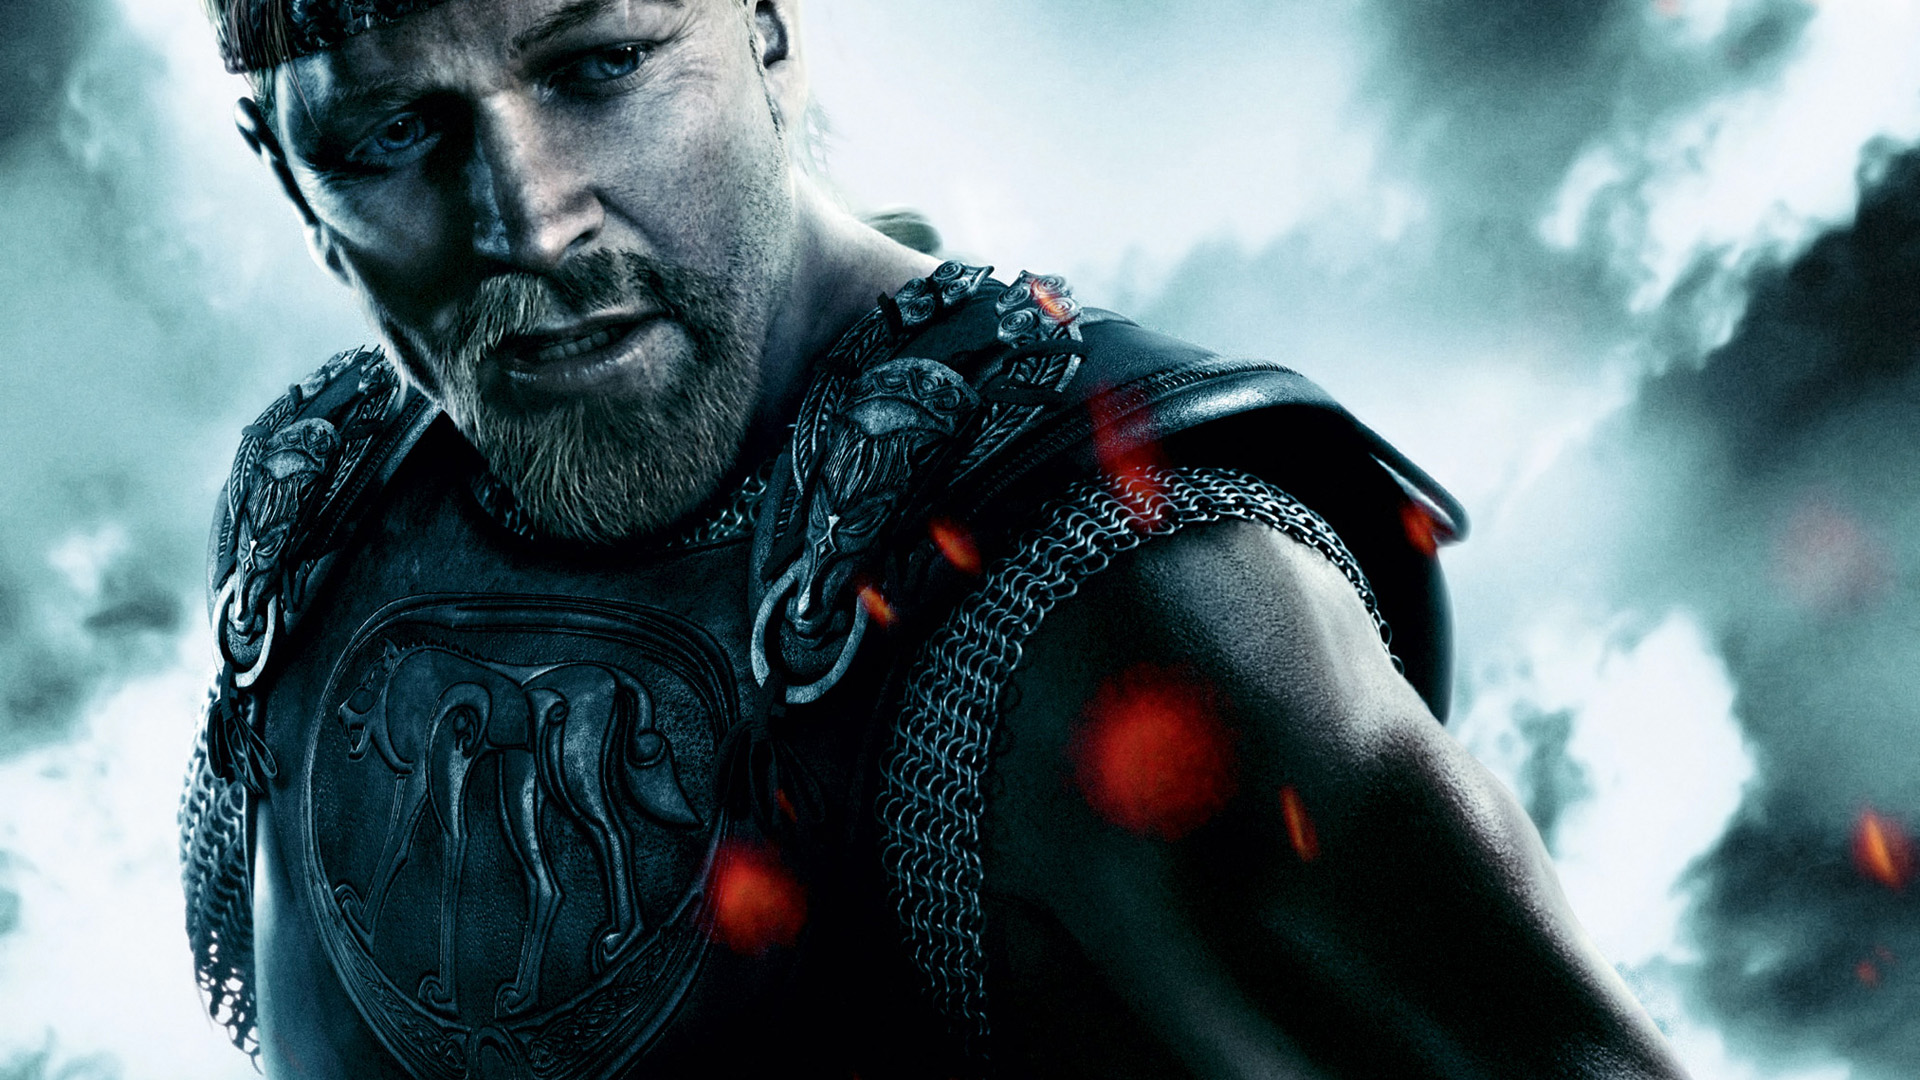 Movie Beowulf (2007) HD Wallpaper | Background Image